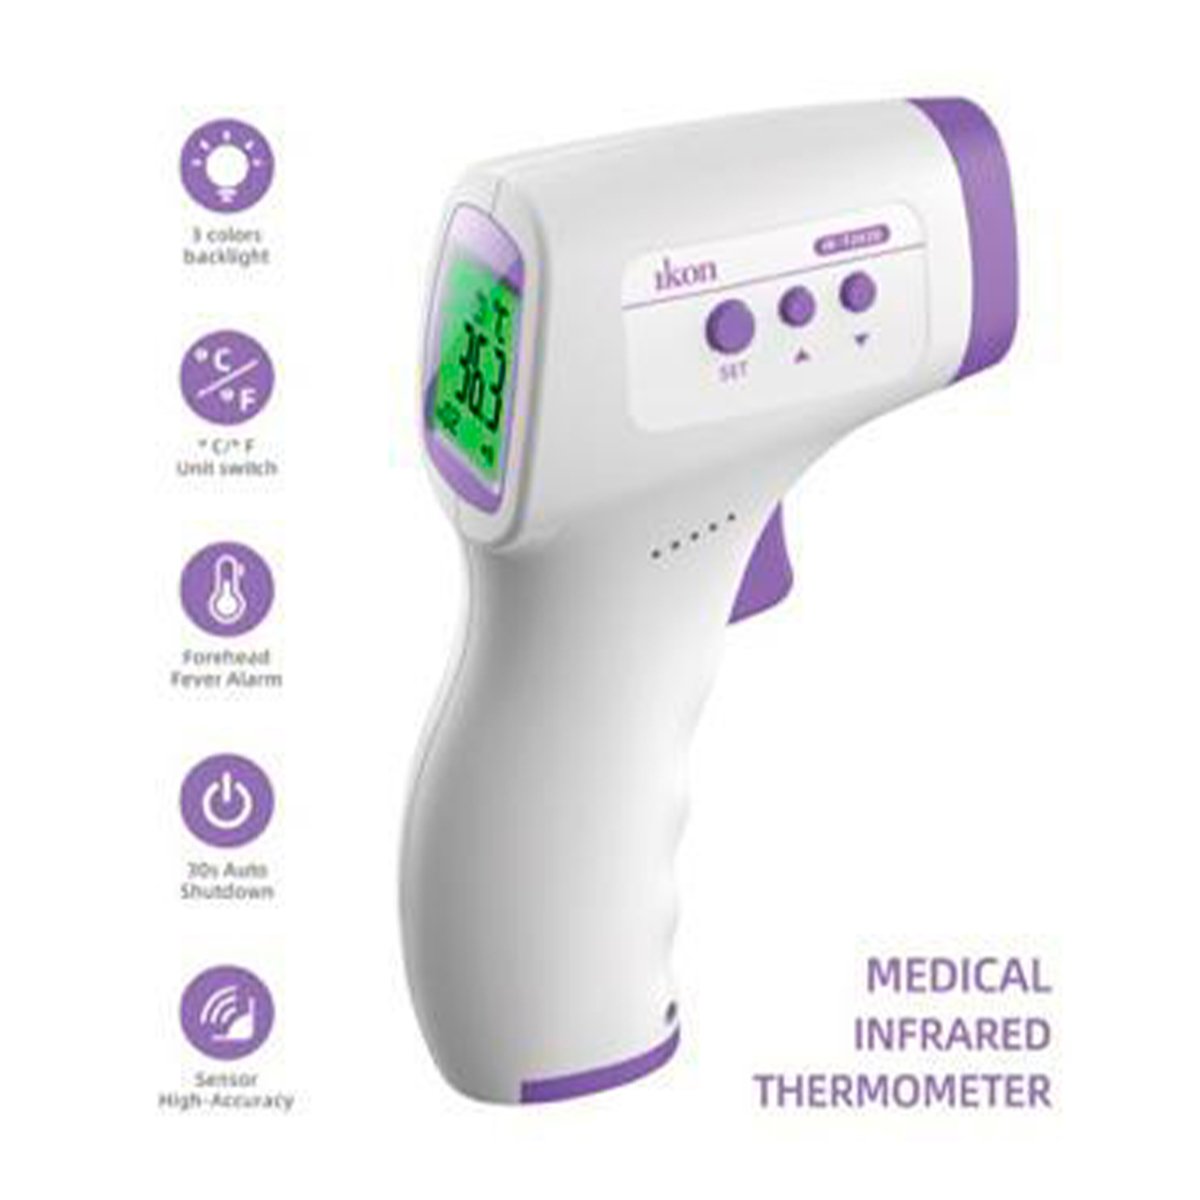 Ikon Digital Forehead Infrared Thermometer IK-T2020